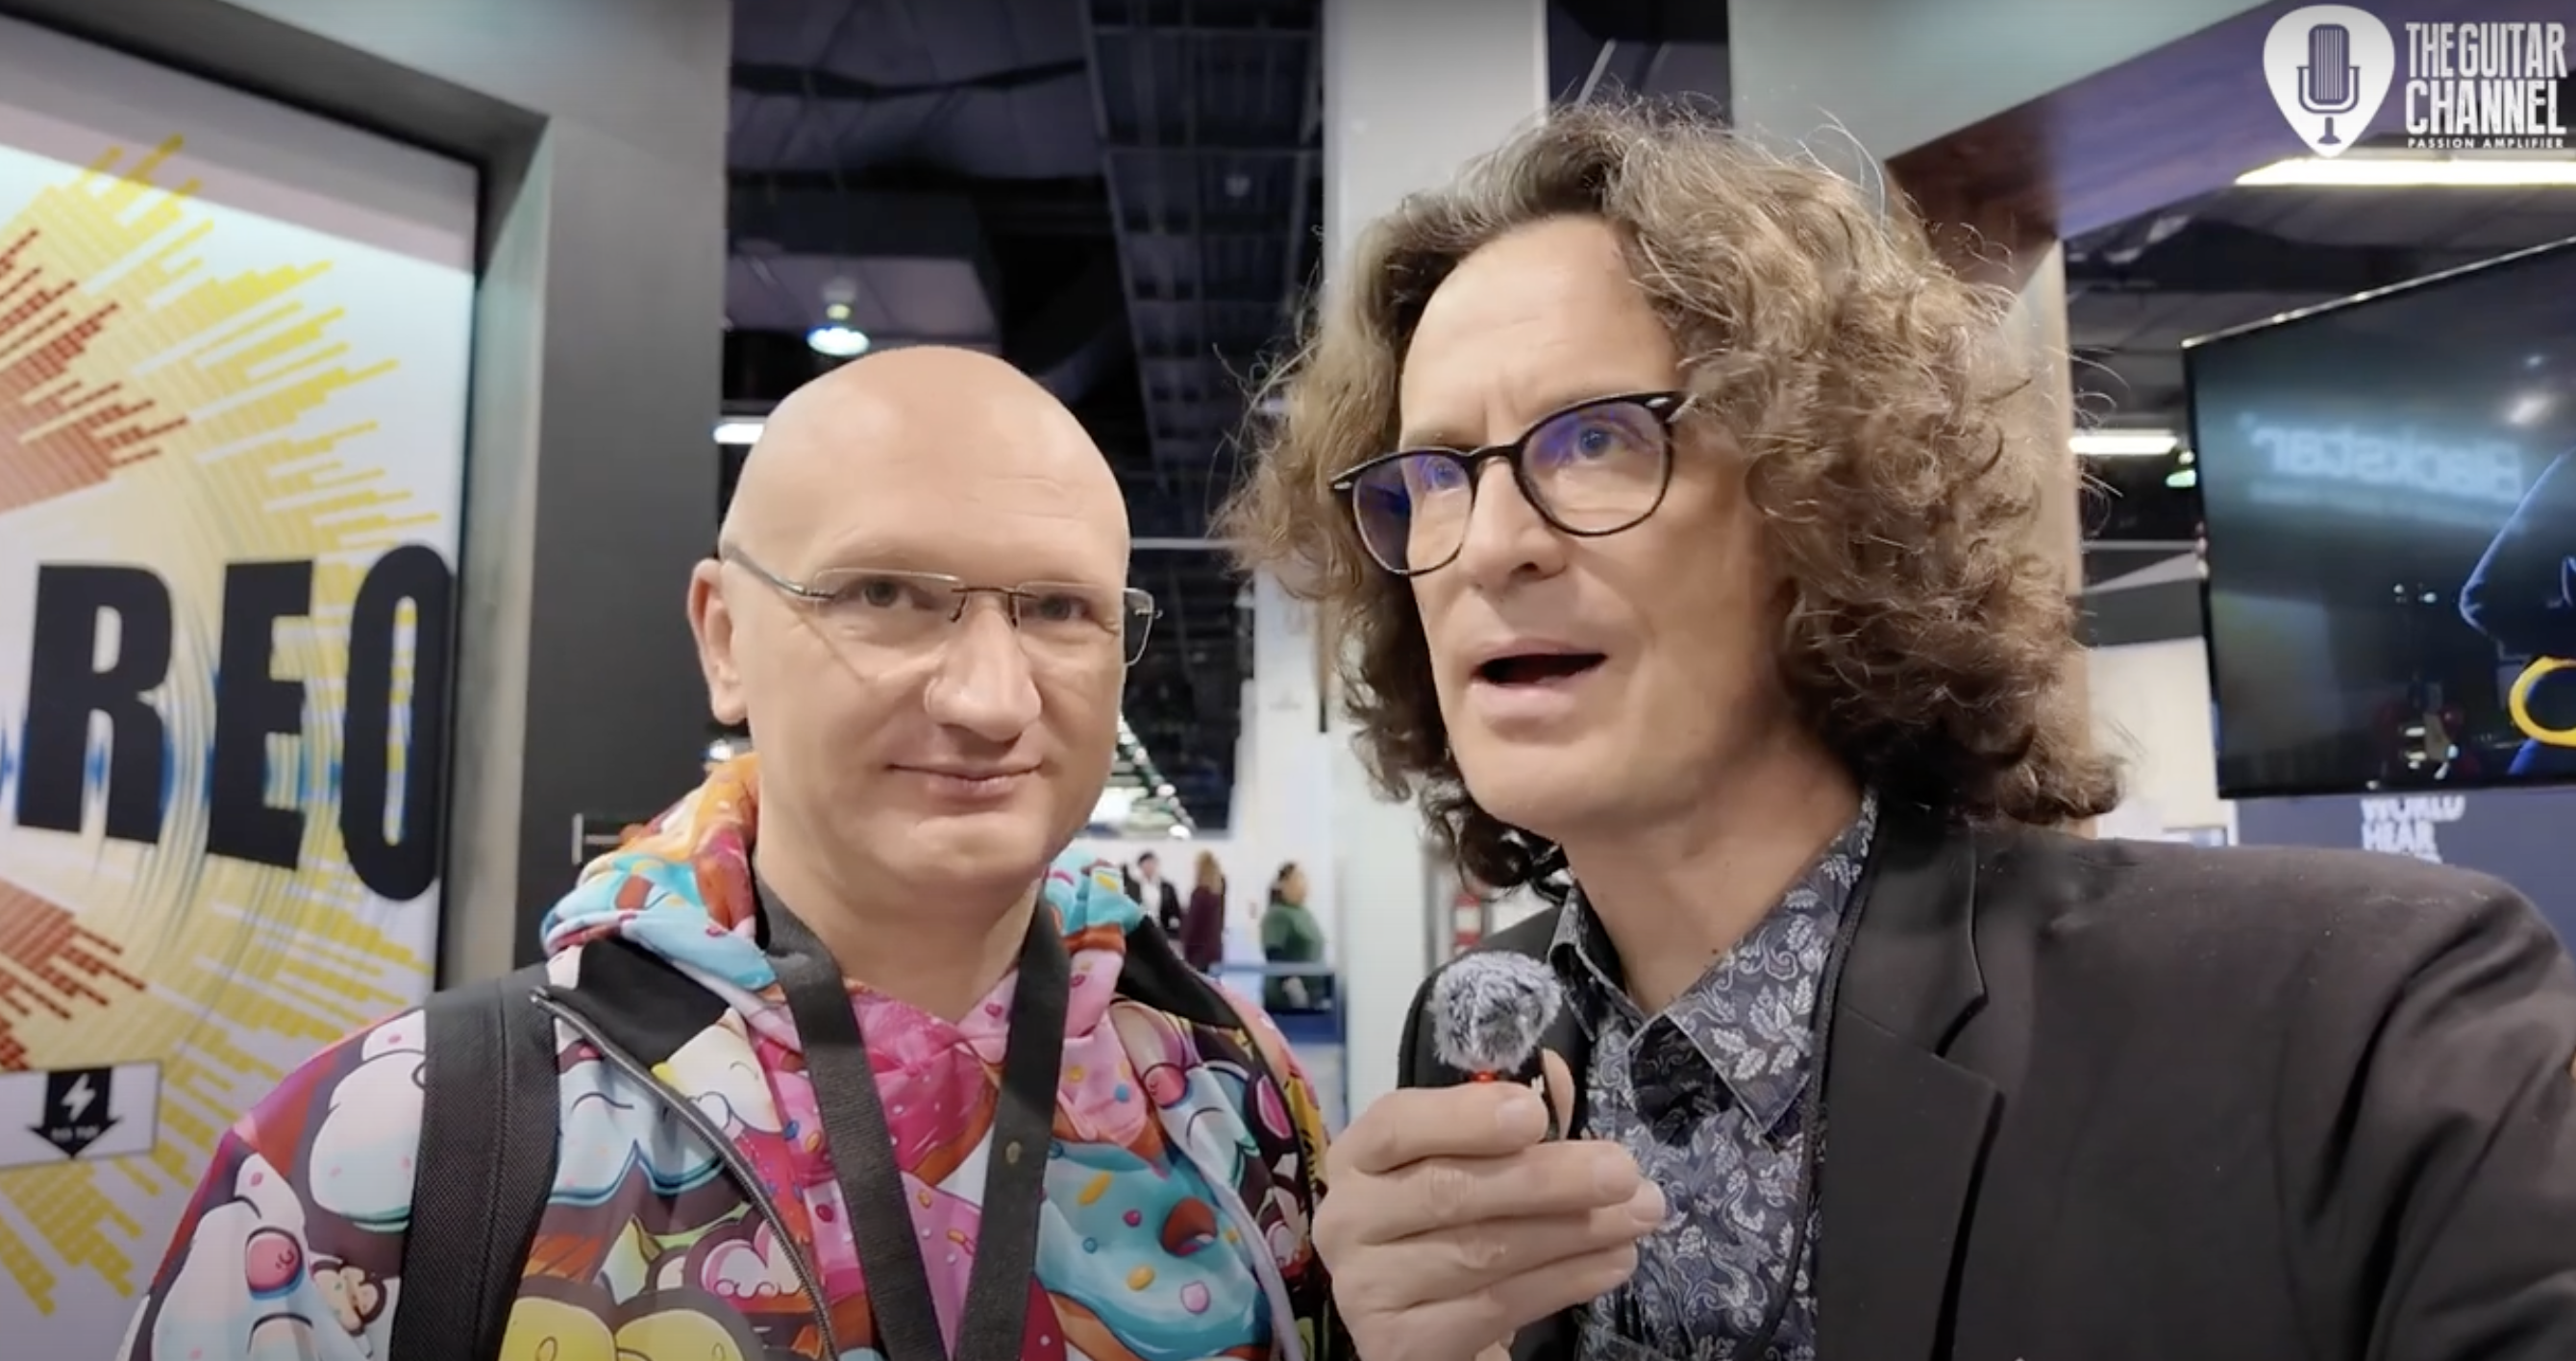 Henning Pauly alias HP42 interview at NAMM